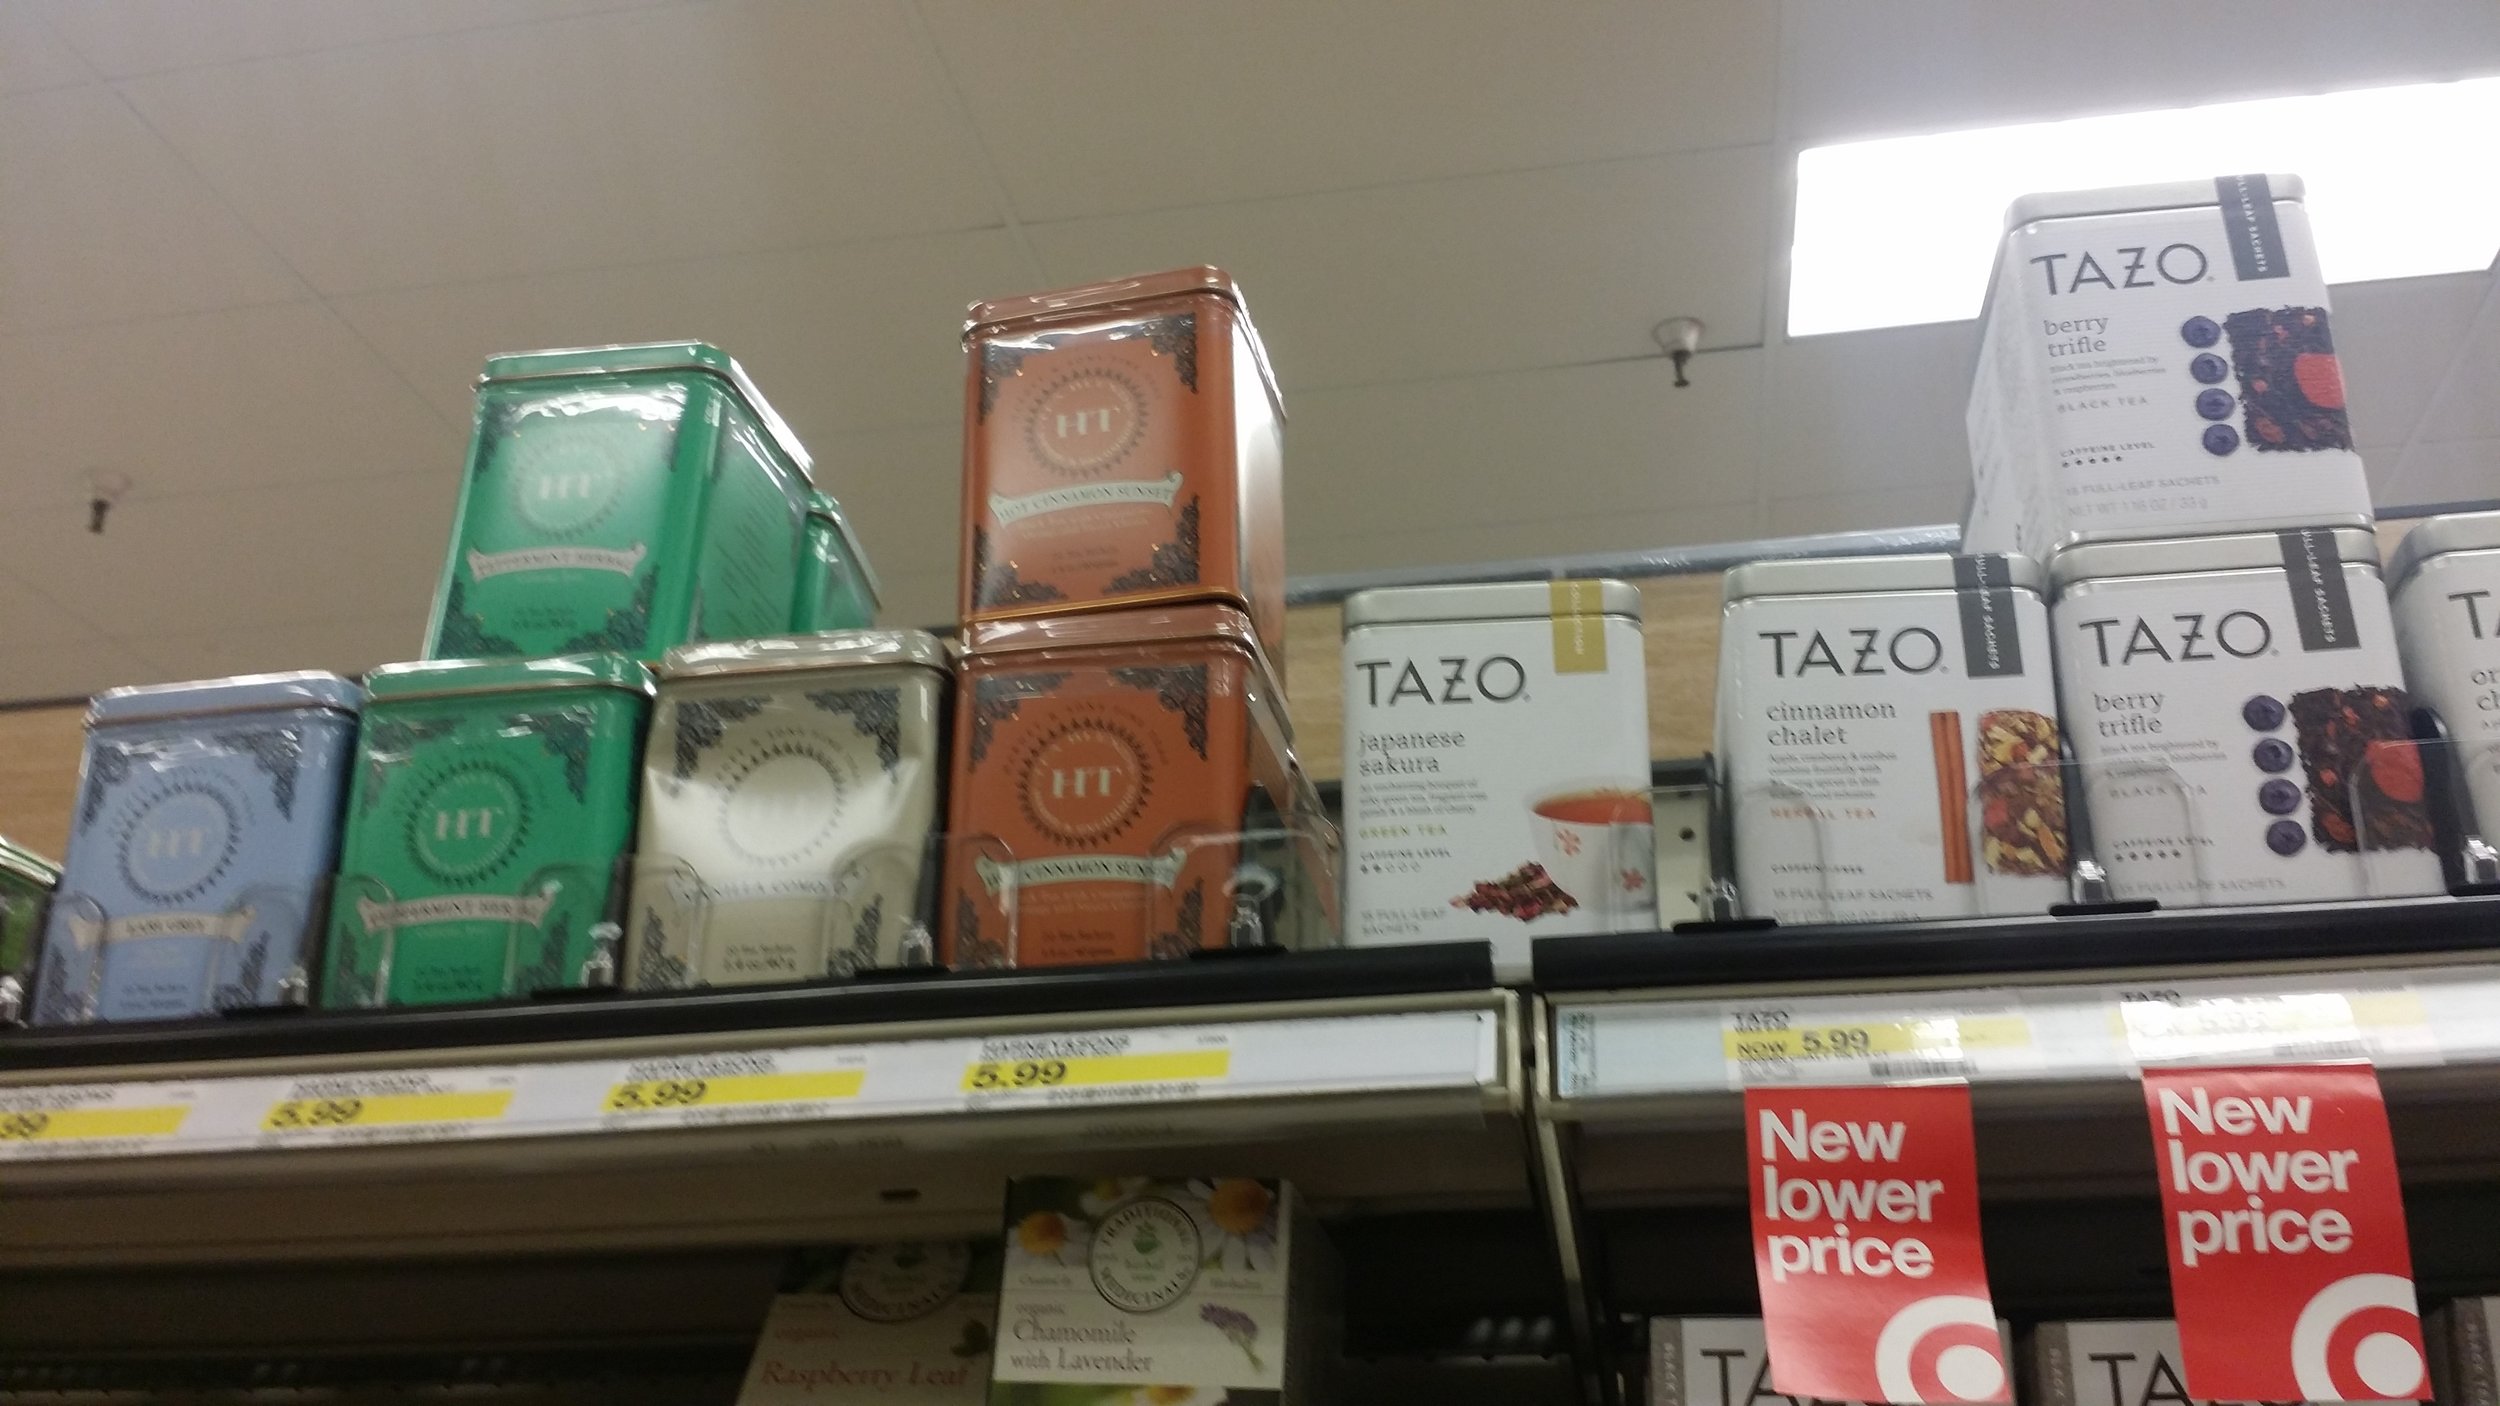  I was surprised to see loose leaf tea tins. The tea most likely is wrapped in plastic on the inside. But, it's way less plastic than individually wrapped tea bags. Most of which have plastic in the tea bag itself making them unable to compost.&nbsp;